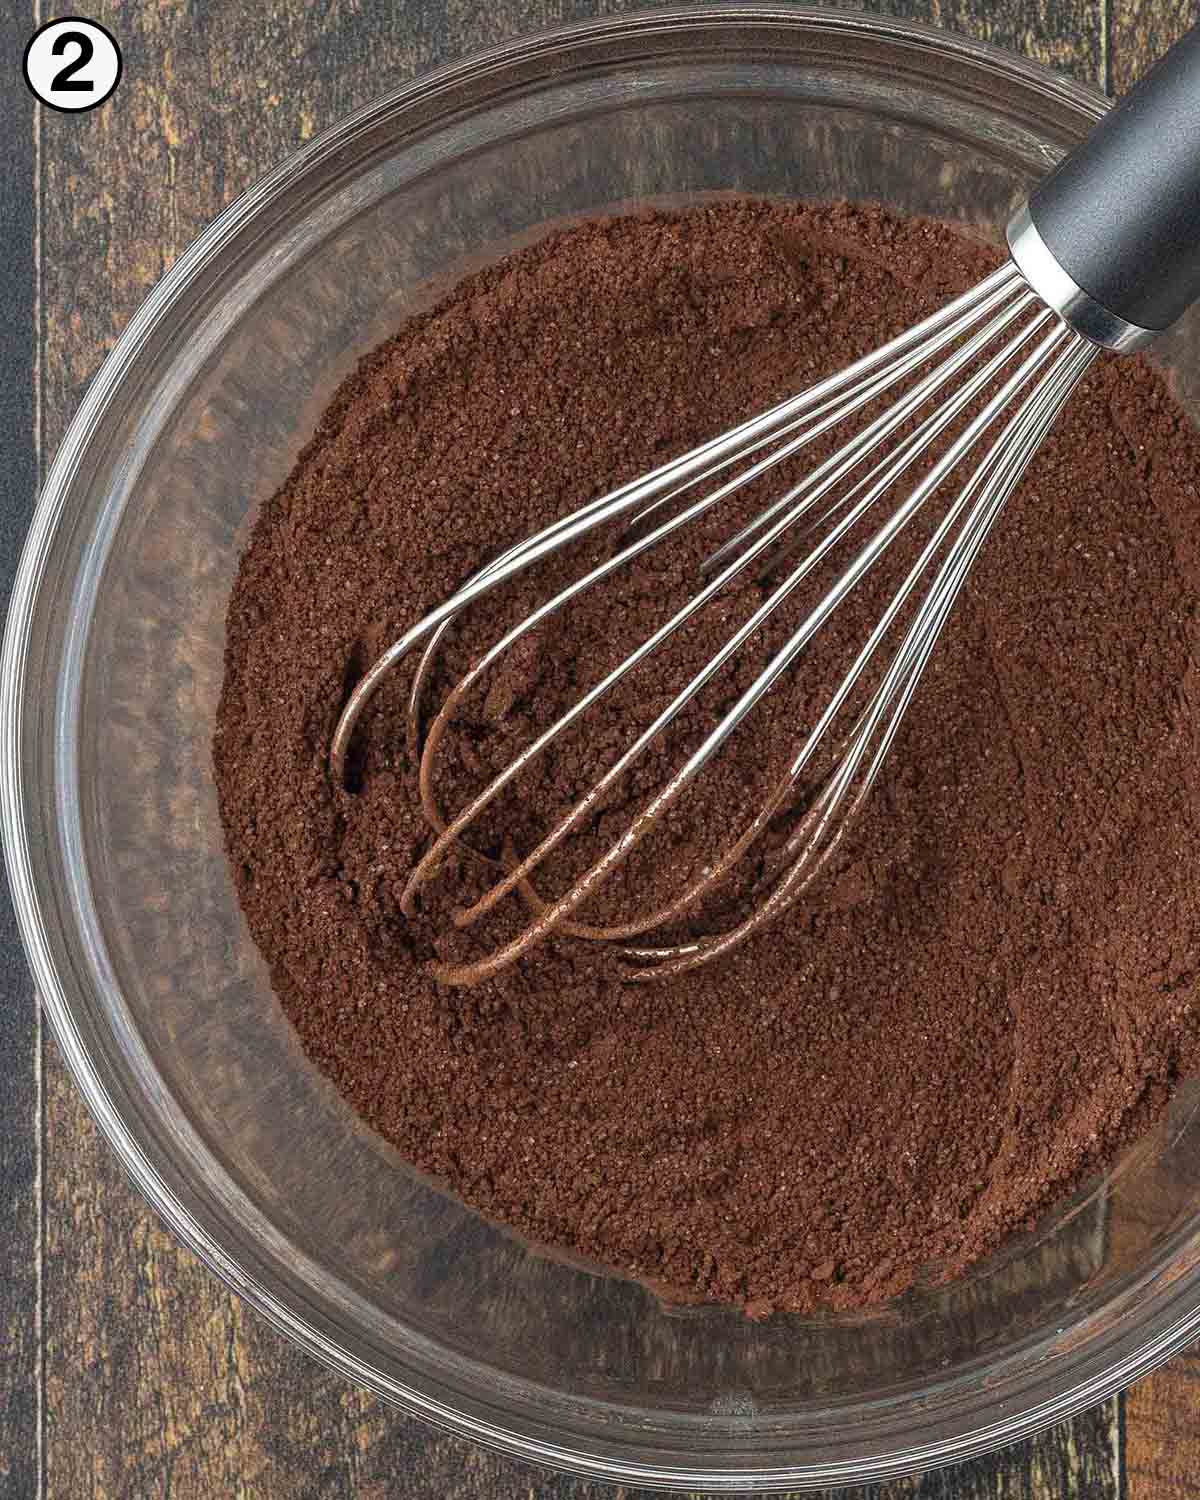 Hot cocoa mix in a glass bowl with a whisk.